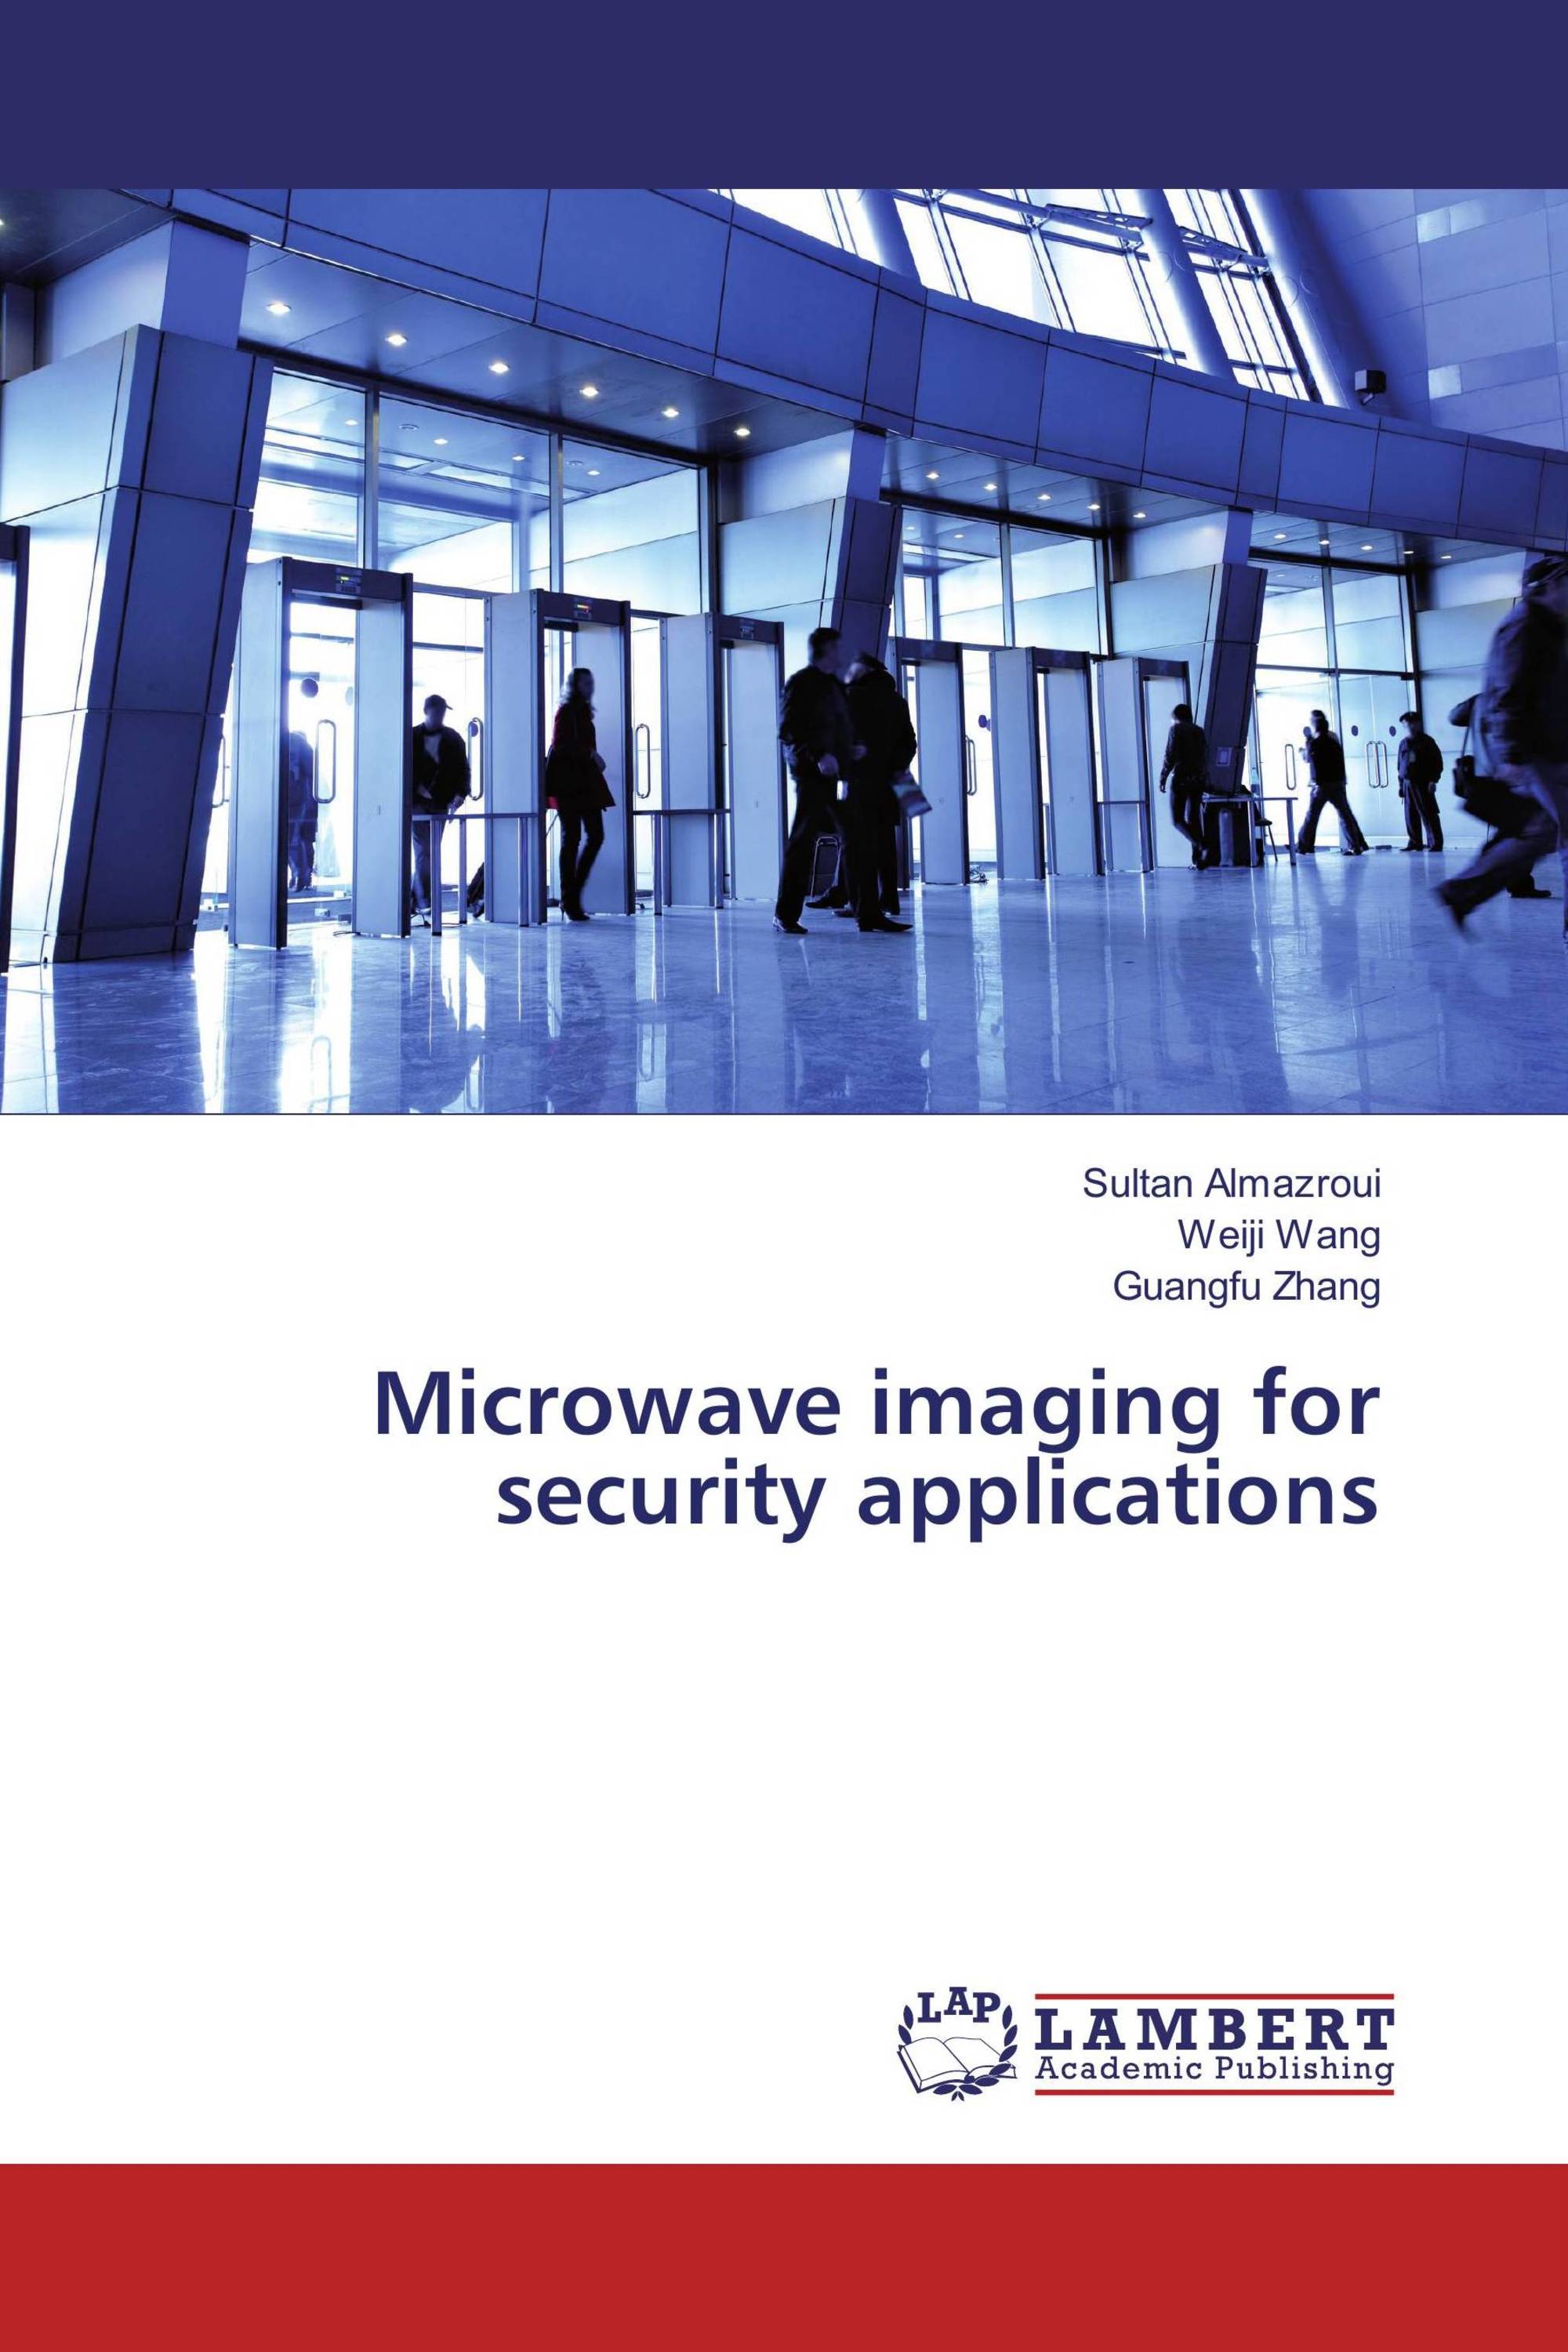 Microwave imaging for security applications